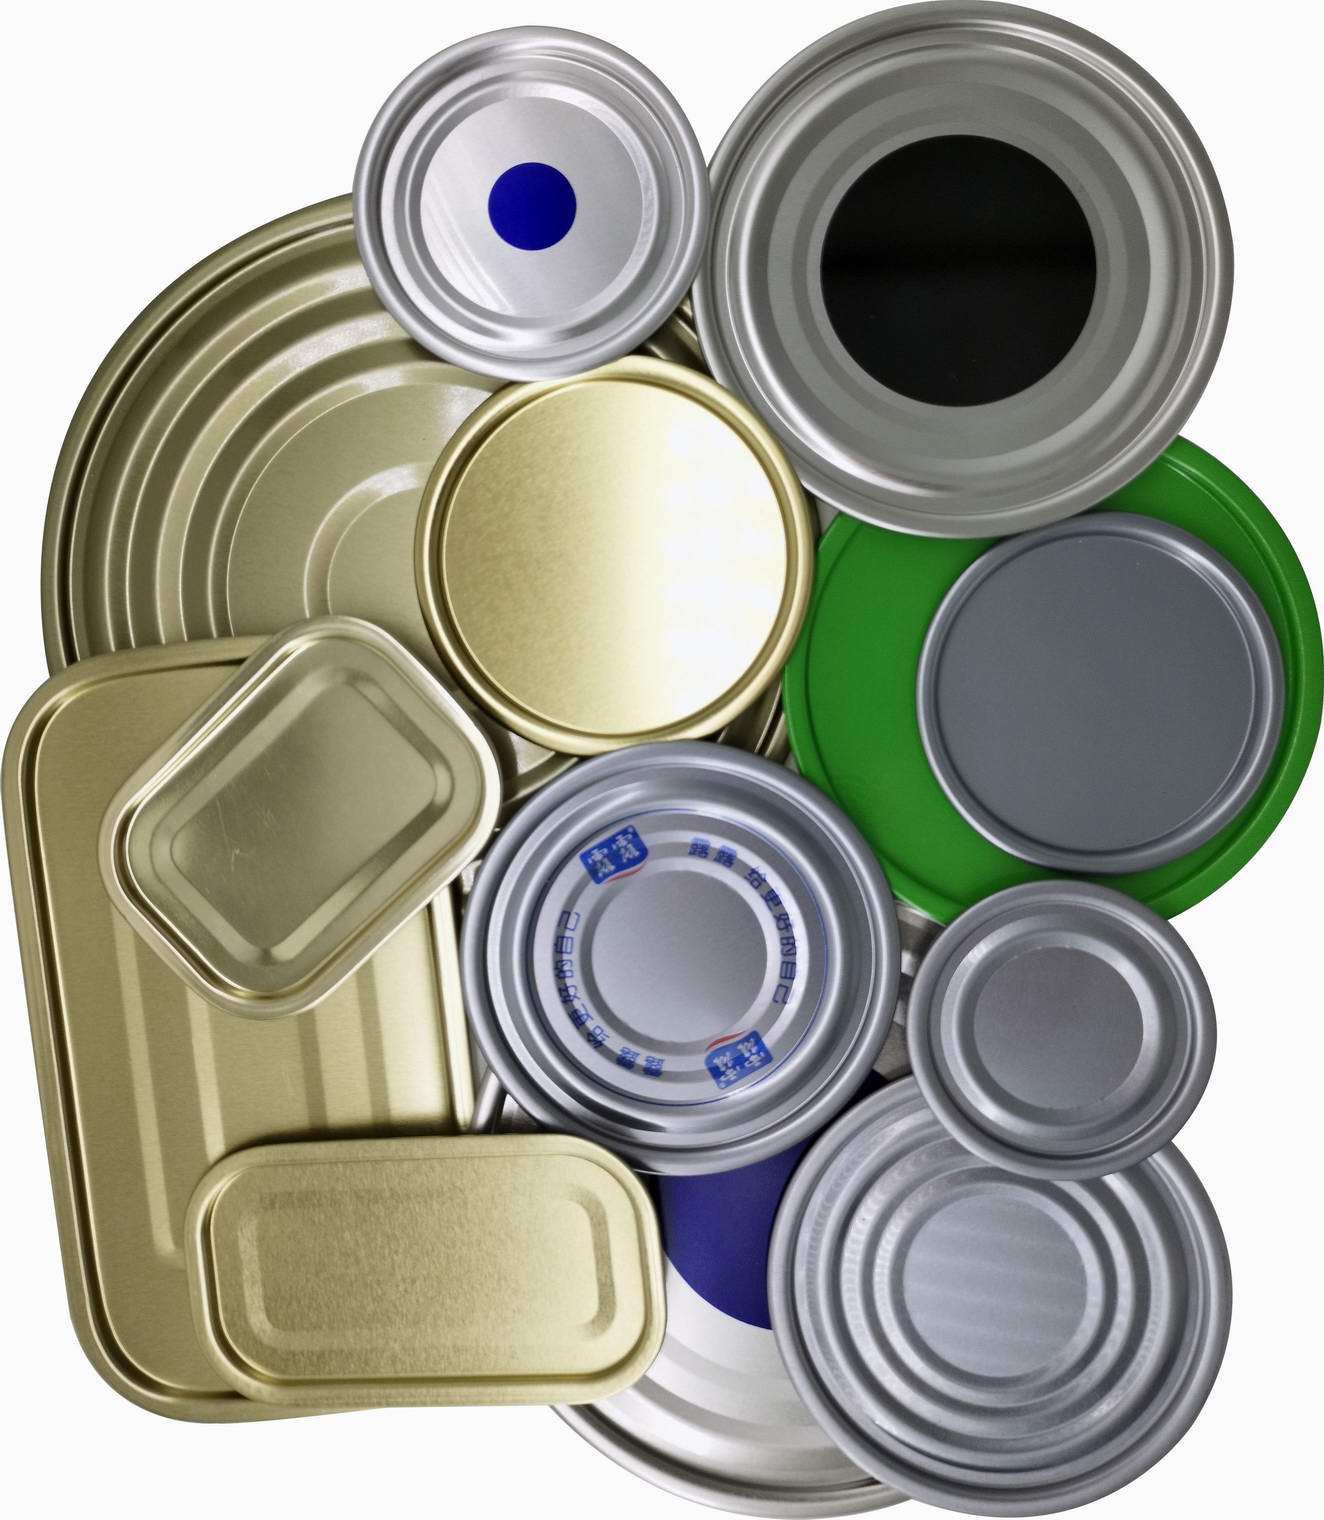 square tin containers manufacturers